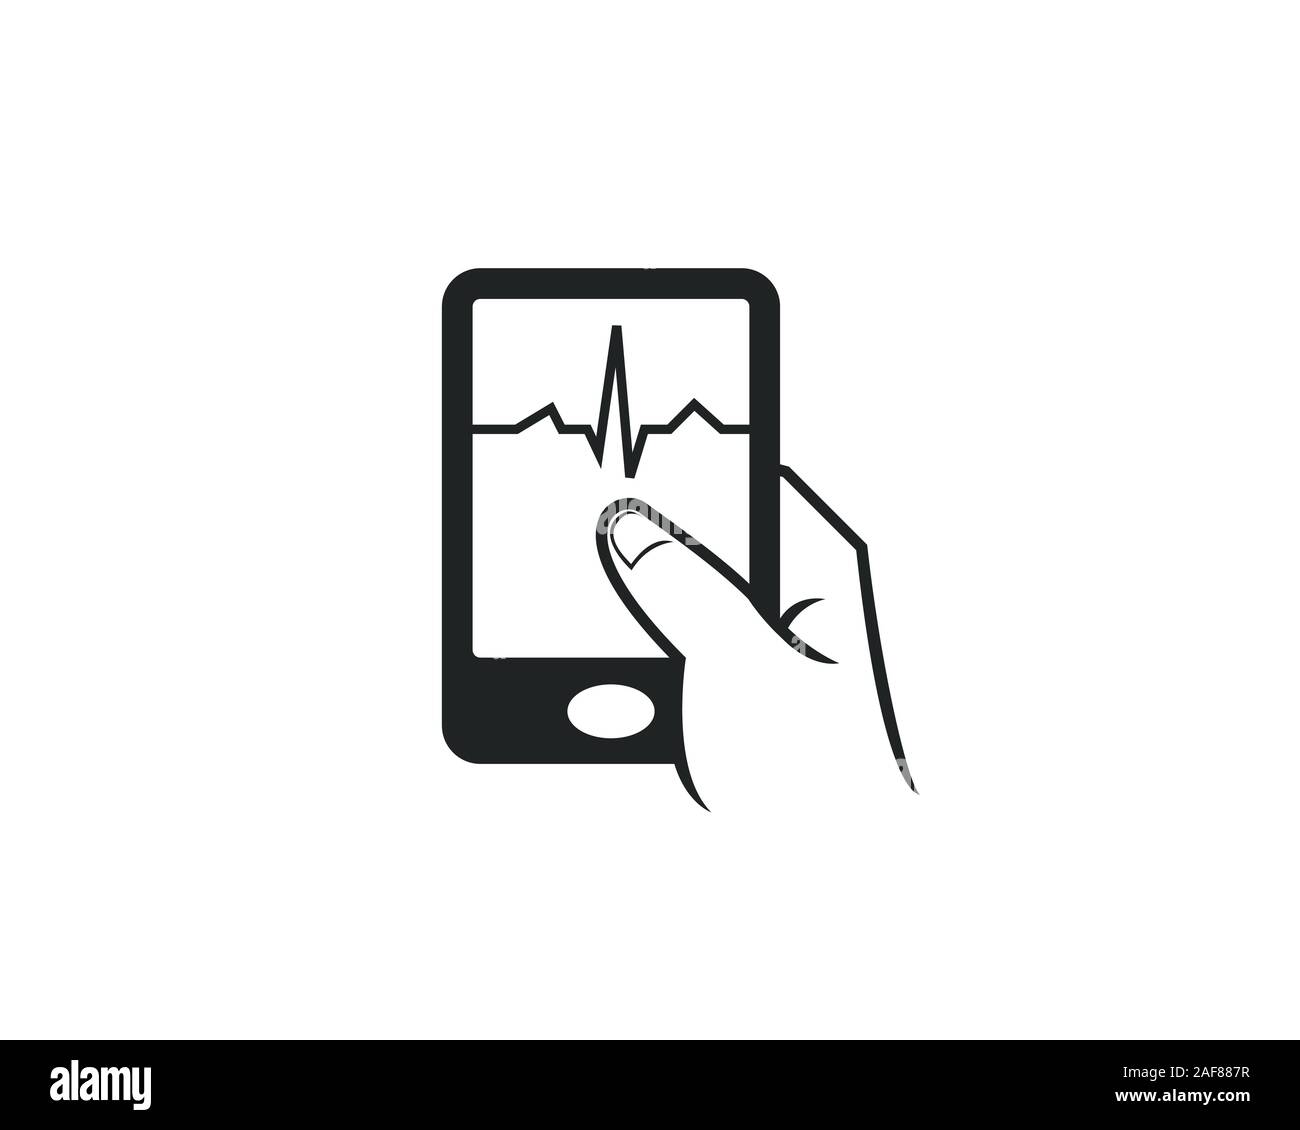 cell phone touch apps icon contain cardio graph hearth beat attack suitable for medical company Stock Vector